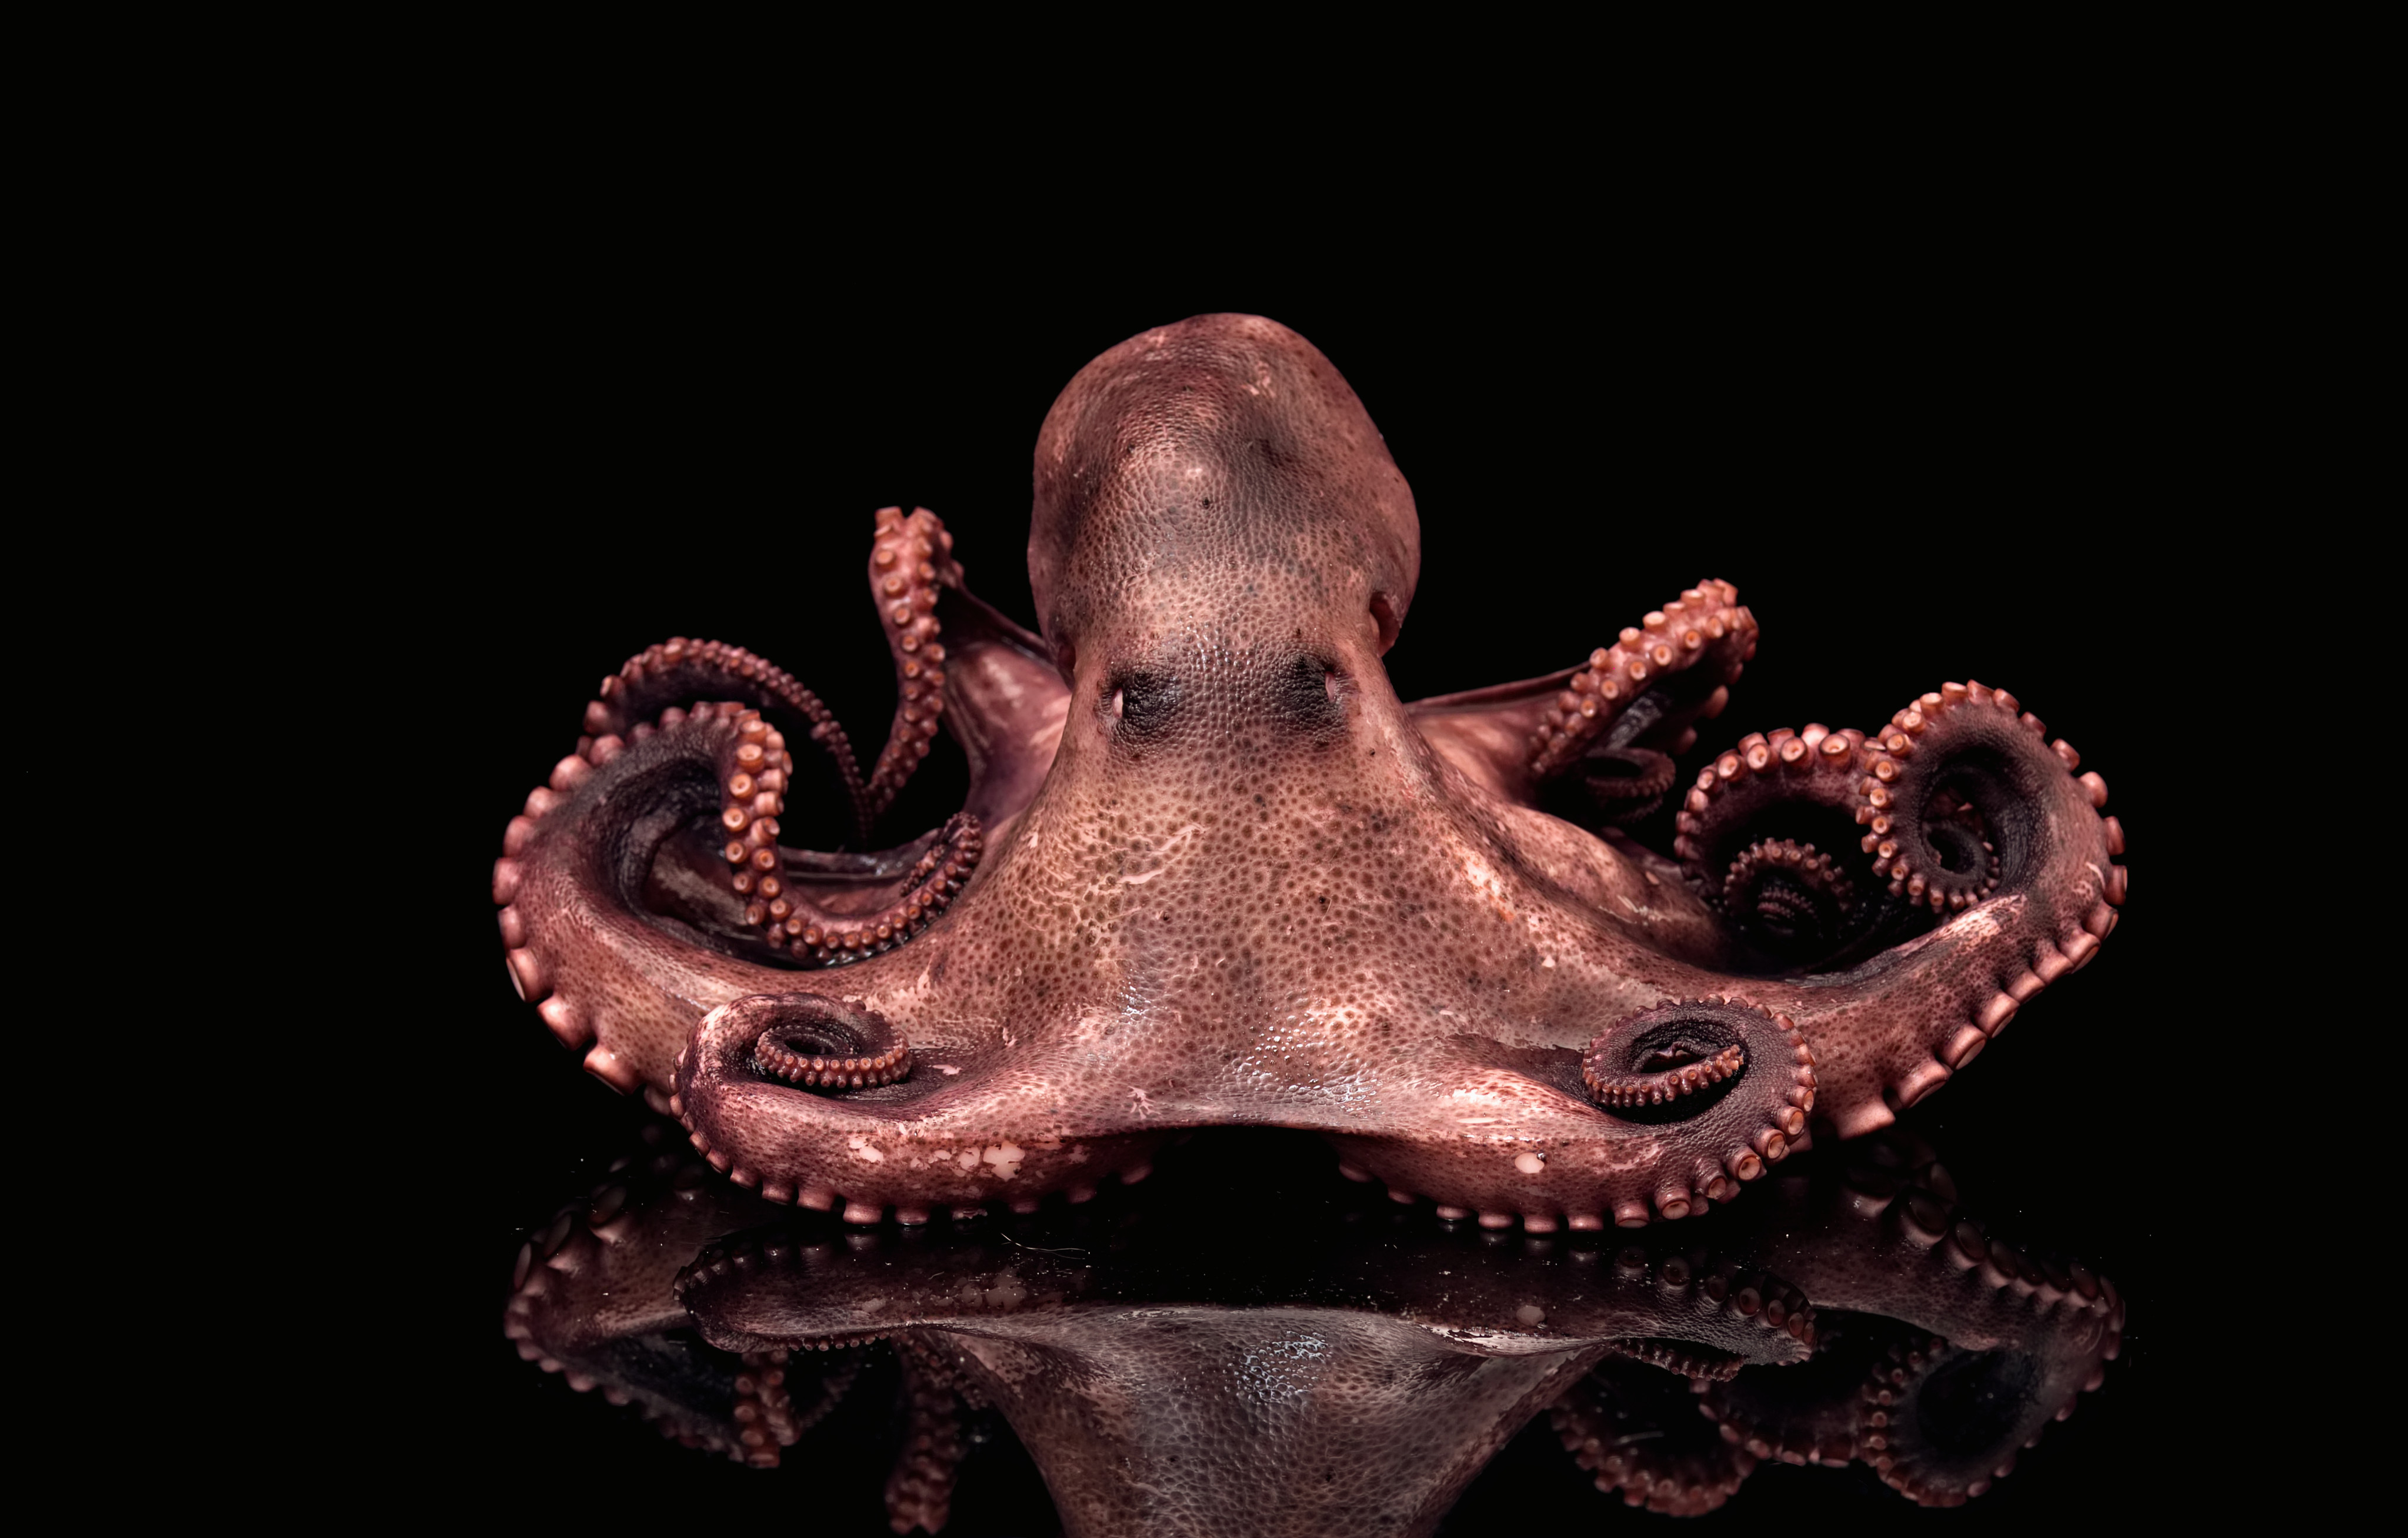 In ancient Greek, the octopus was known as “polypous”, or “many-footed”, which was later borrowed into Latin as “polypus” (with forms in other languages). Photo: Getty Images